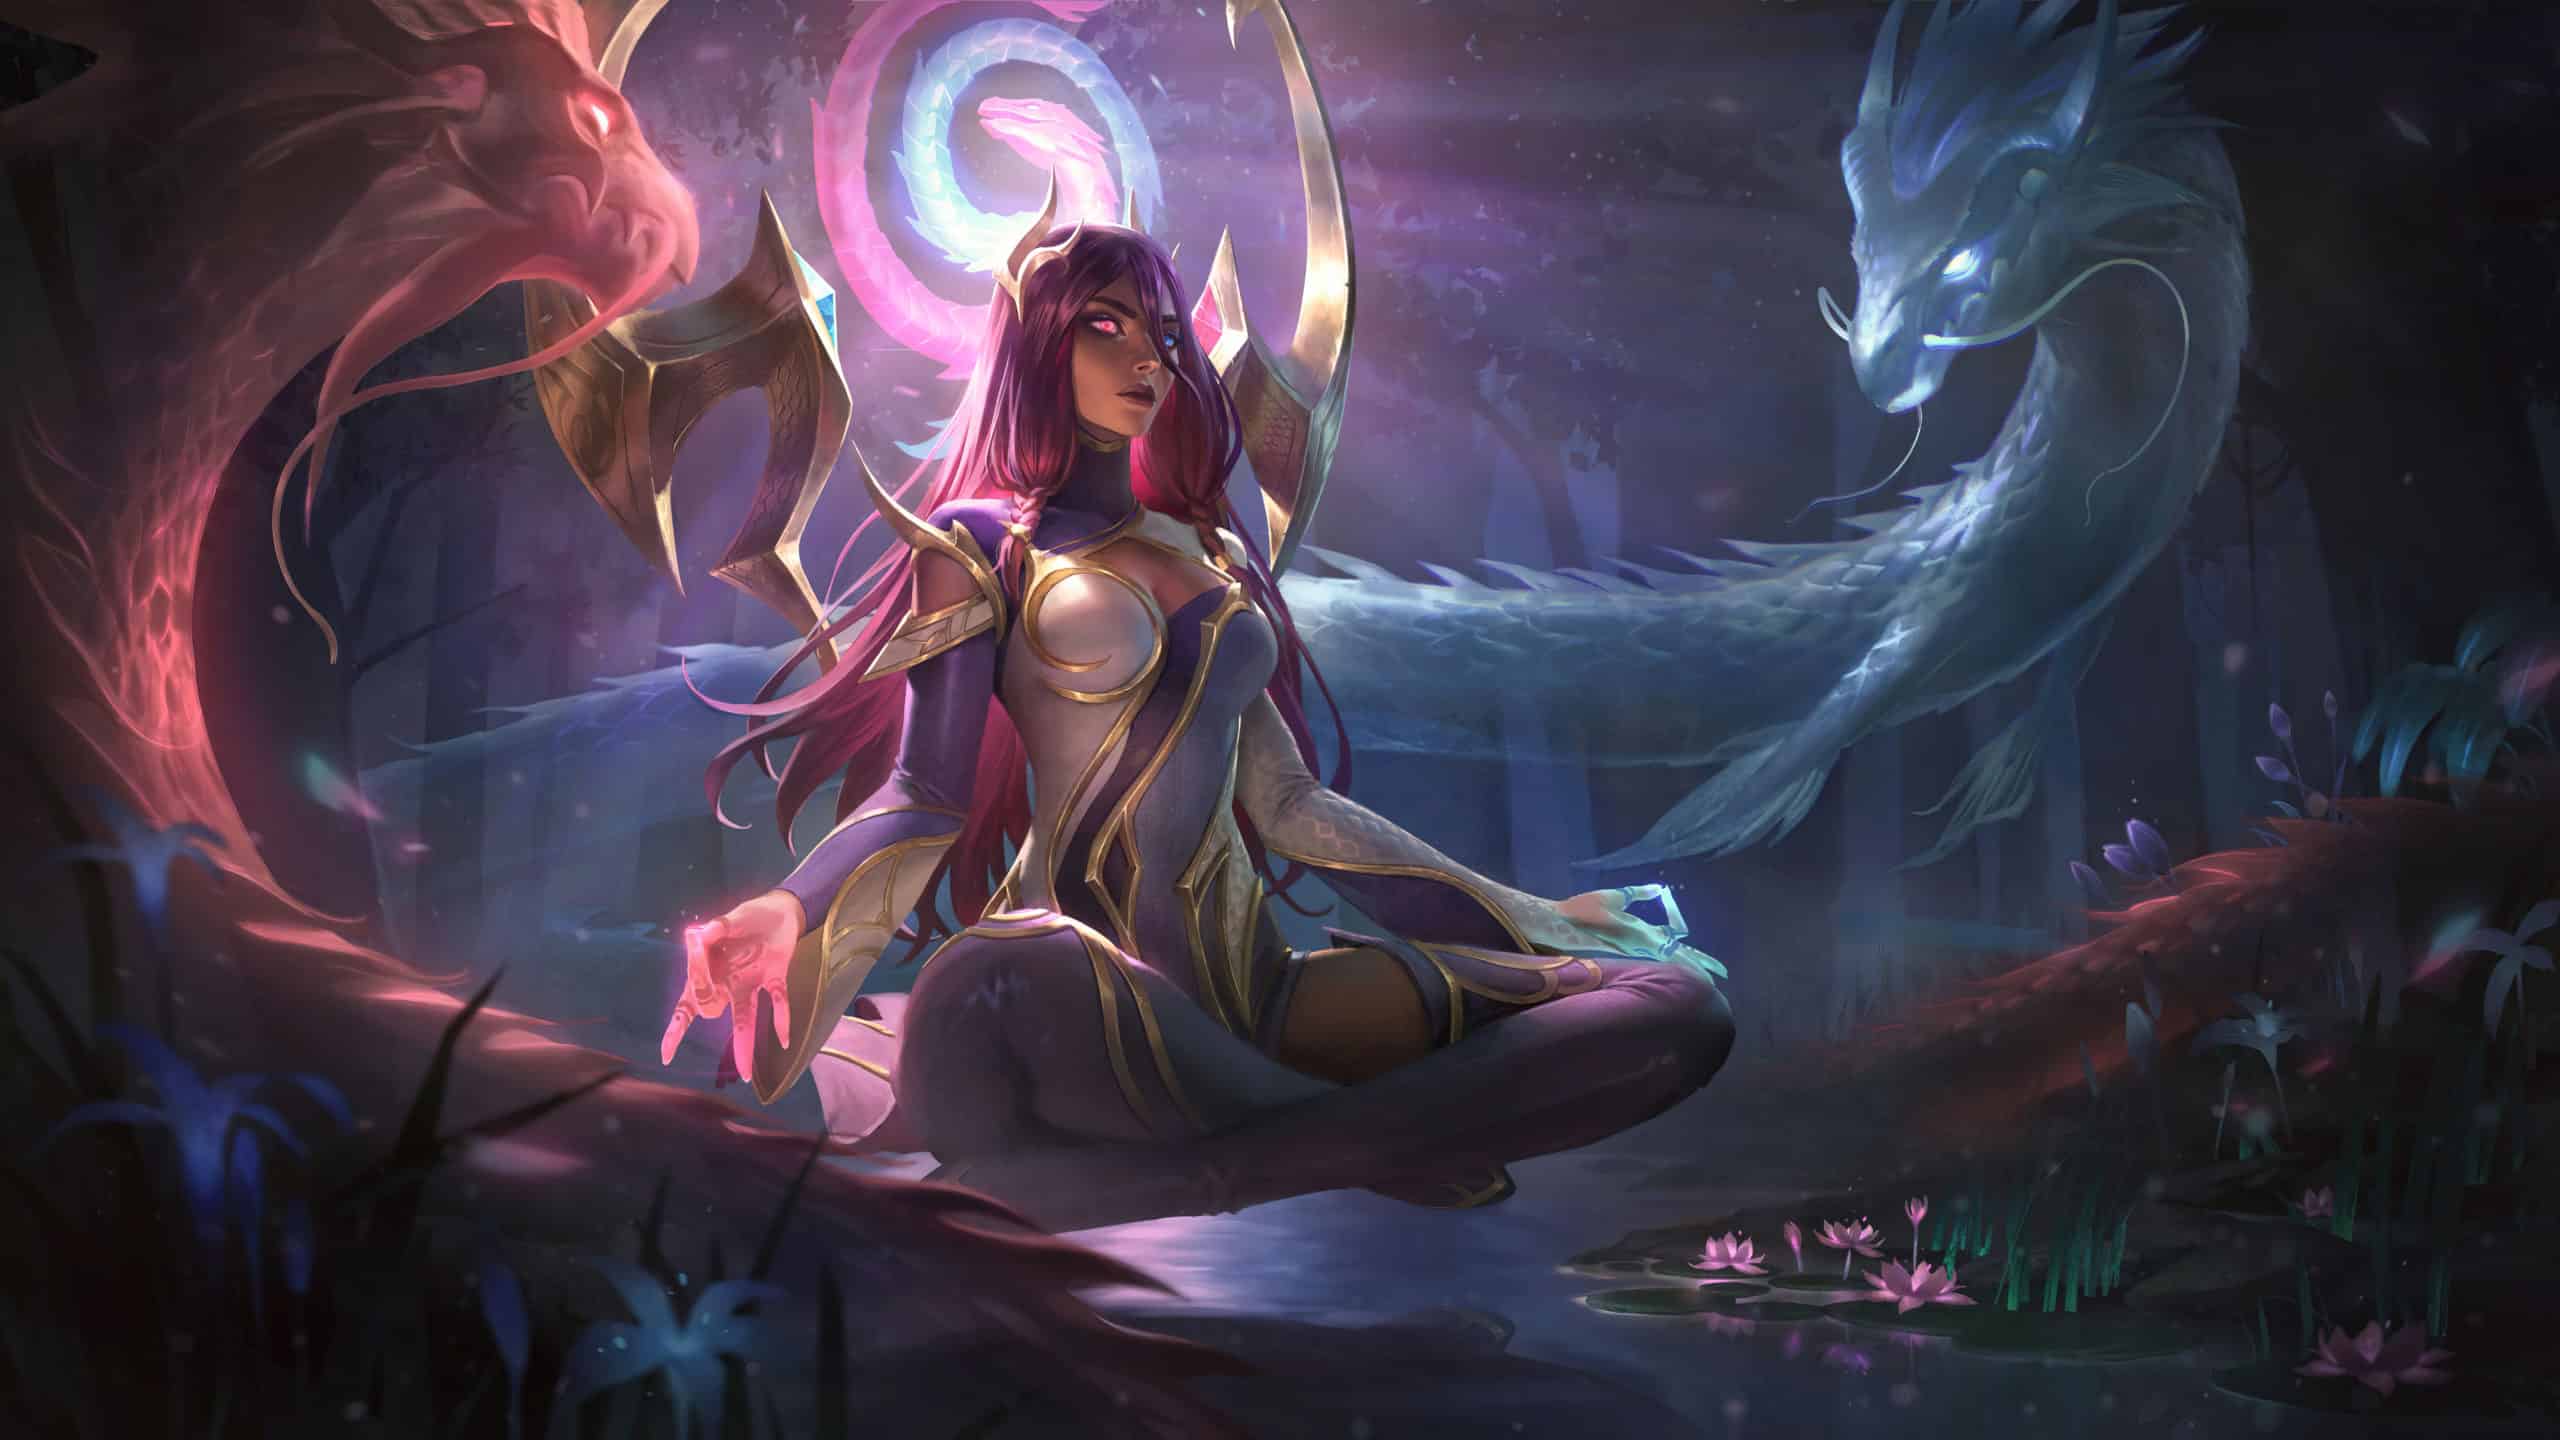 Top League of Legends Images, Wallpapers, Splash Arts - WhatIfGaming